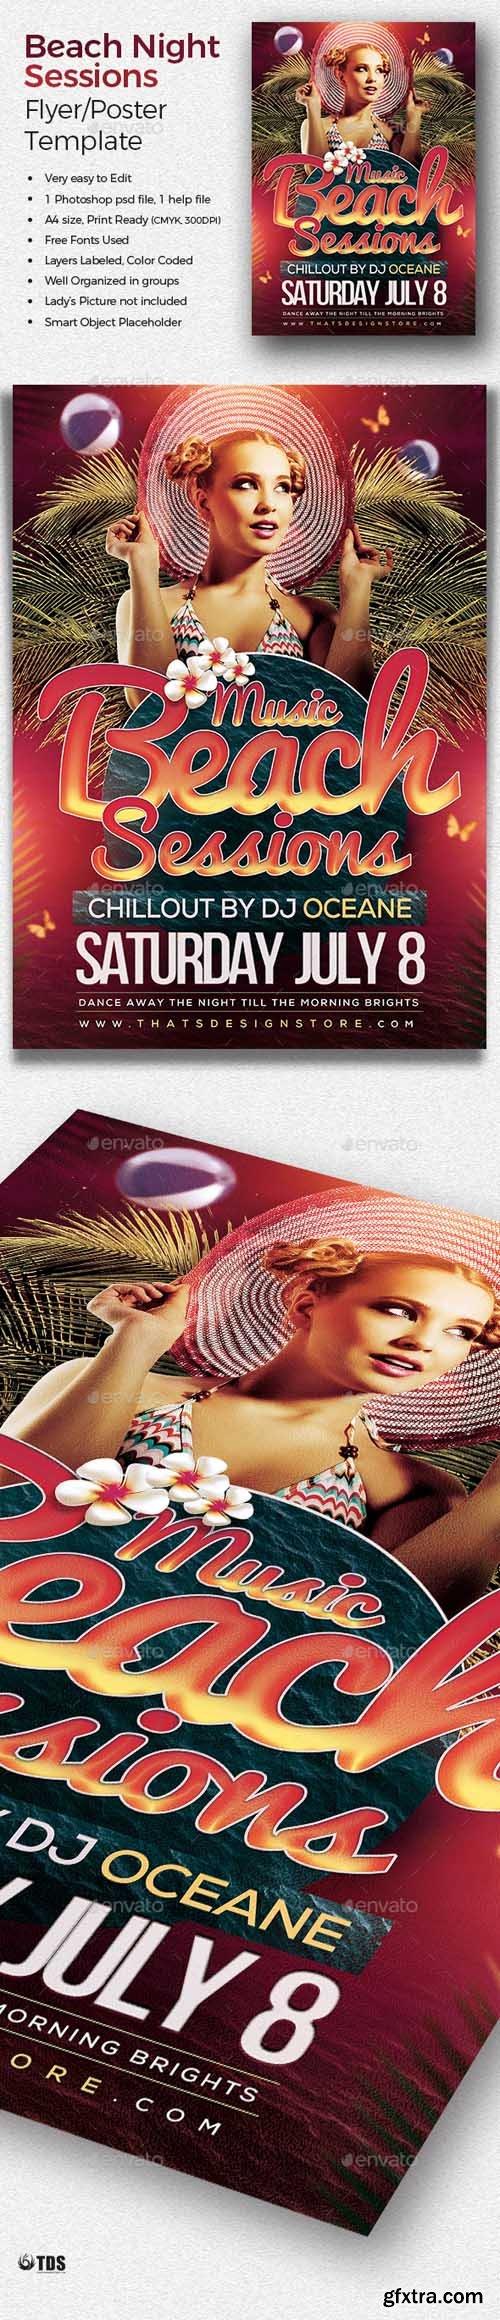 GR - Beach Night Sessions Flyer Template 19841916